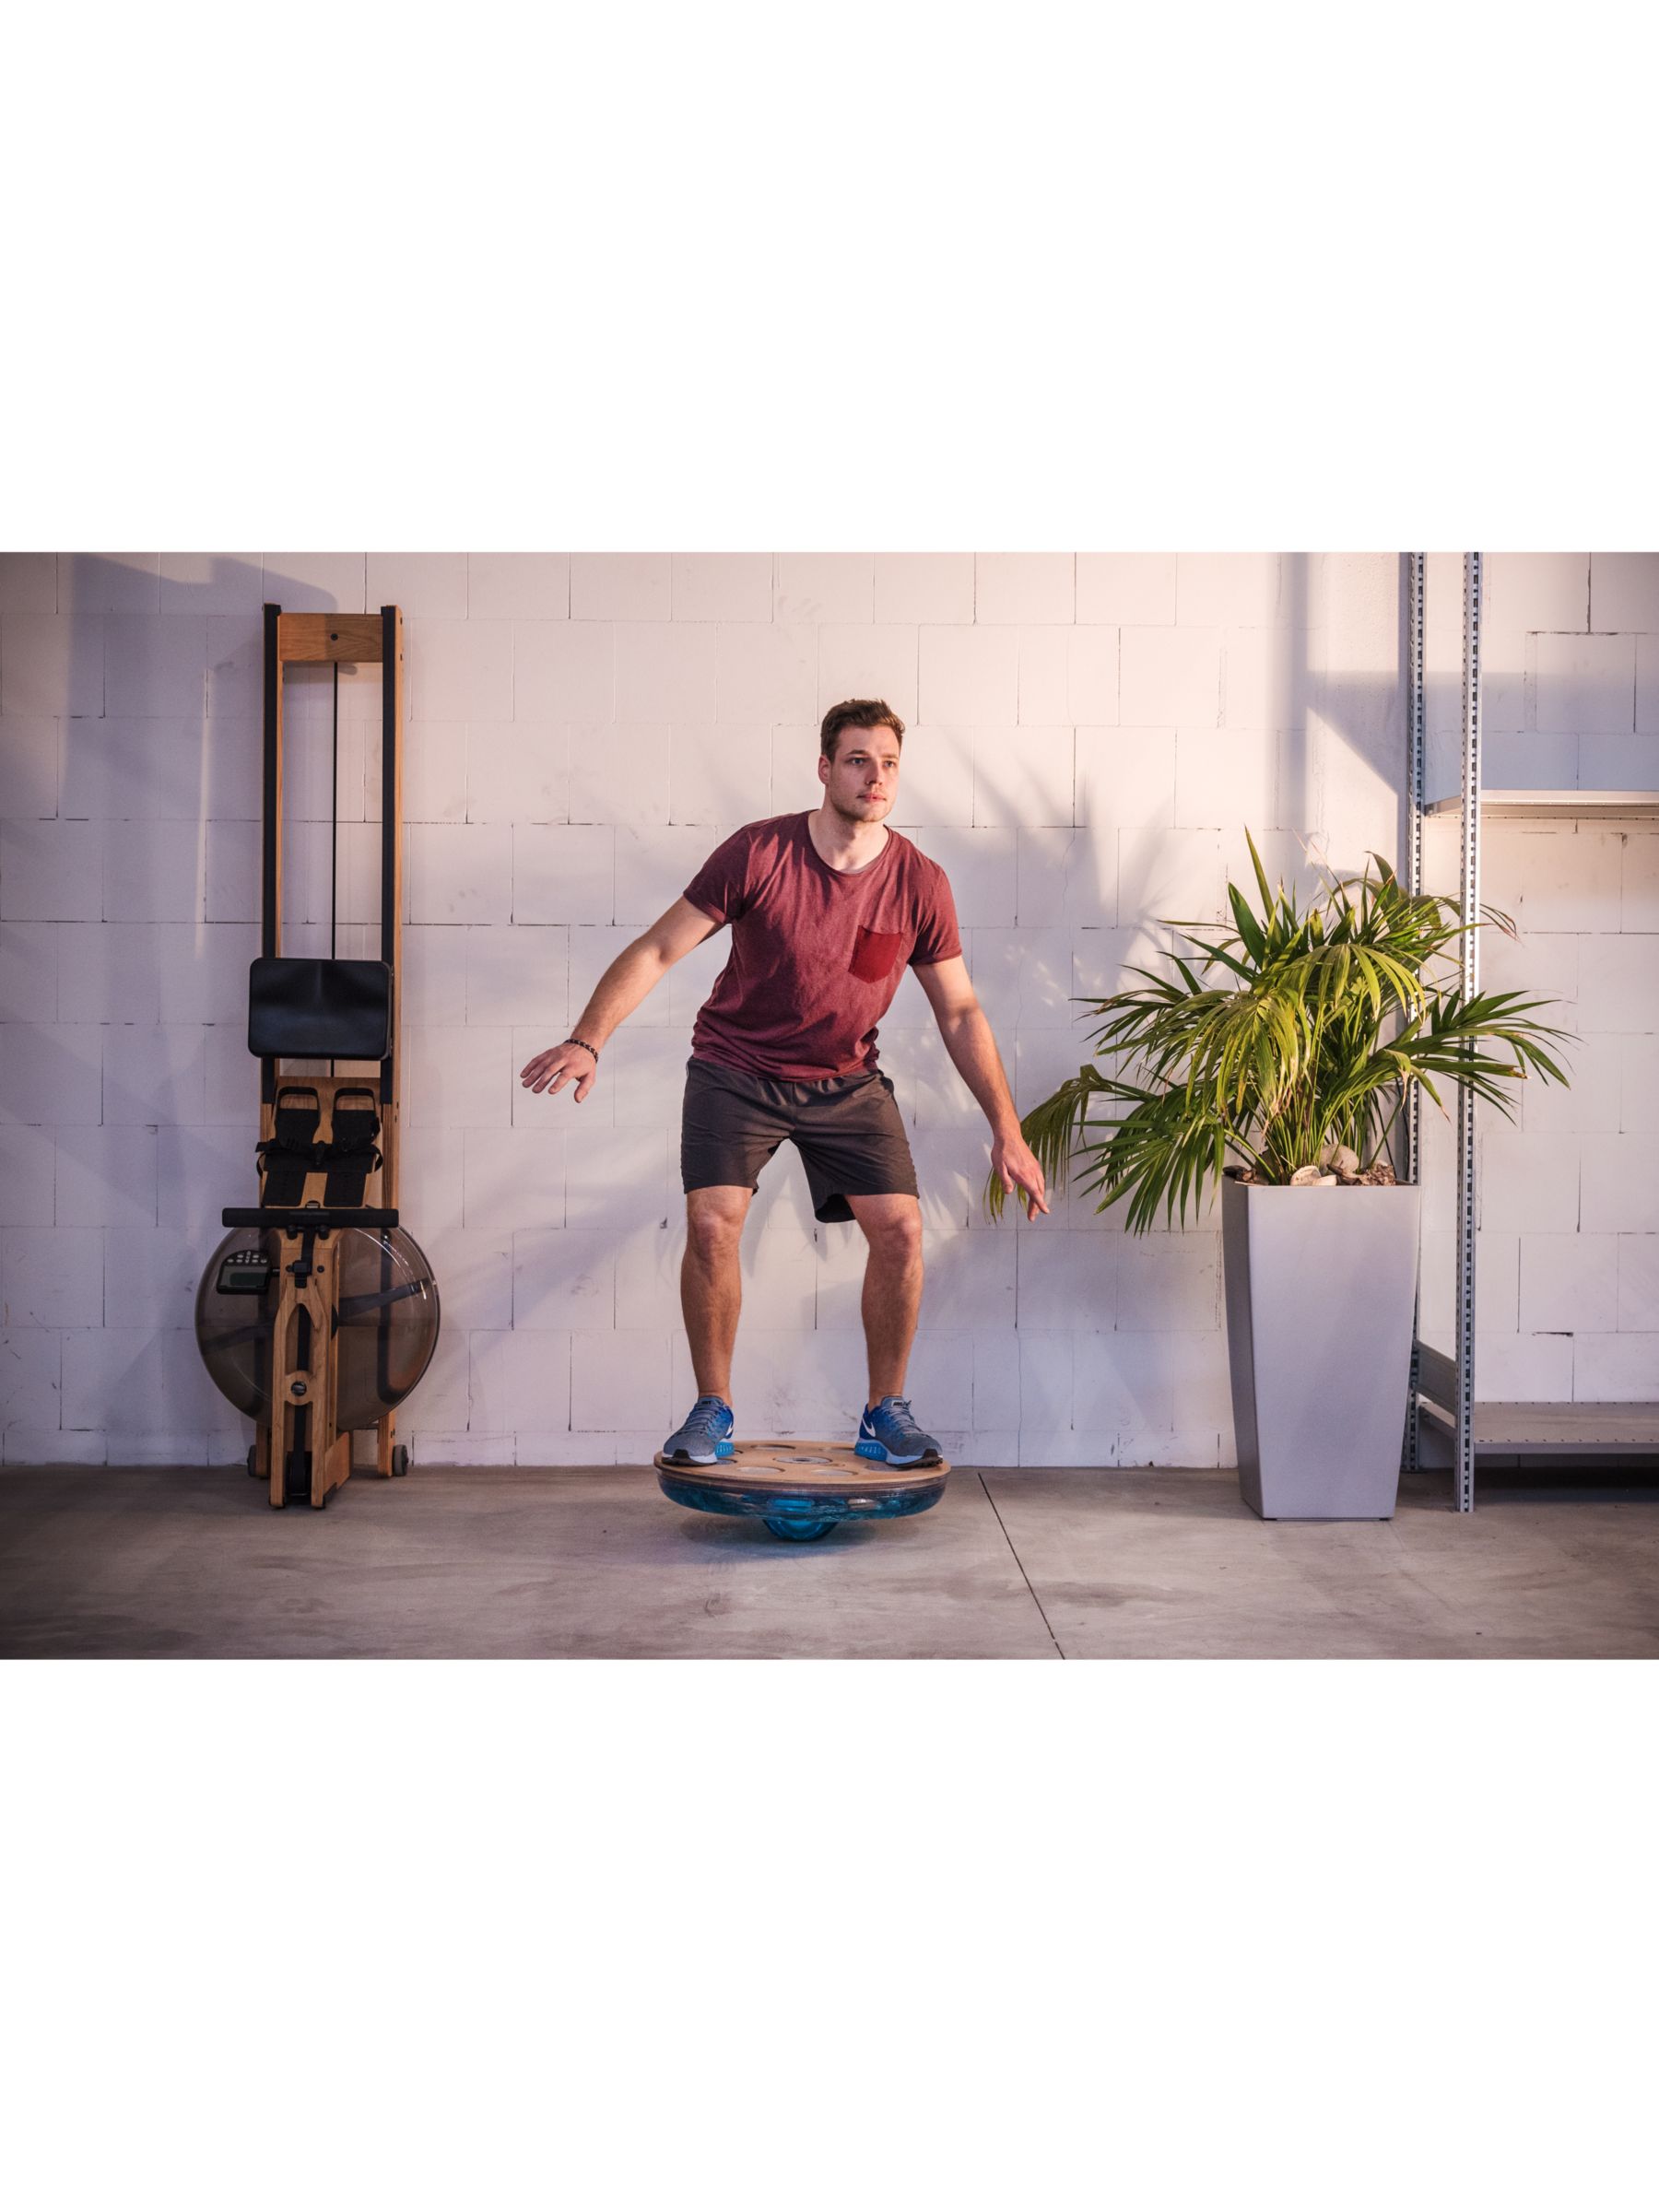 NOHRD Eau-Me Board - Balance boards and exercise